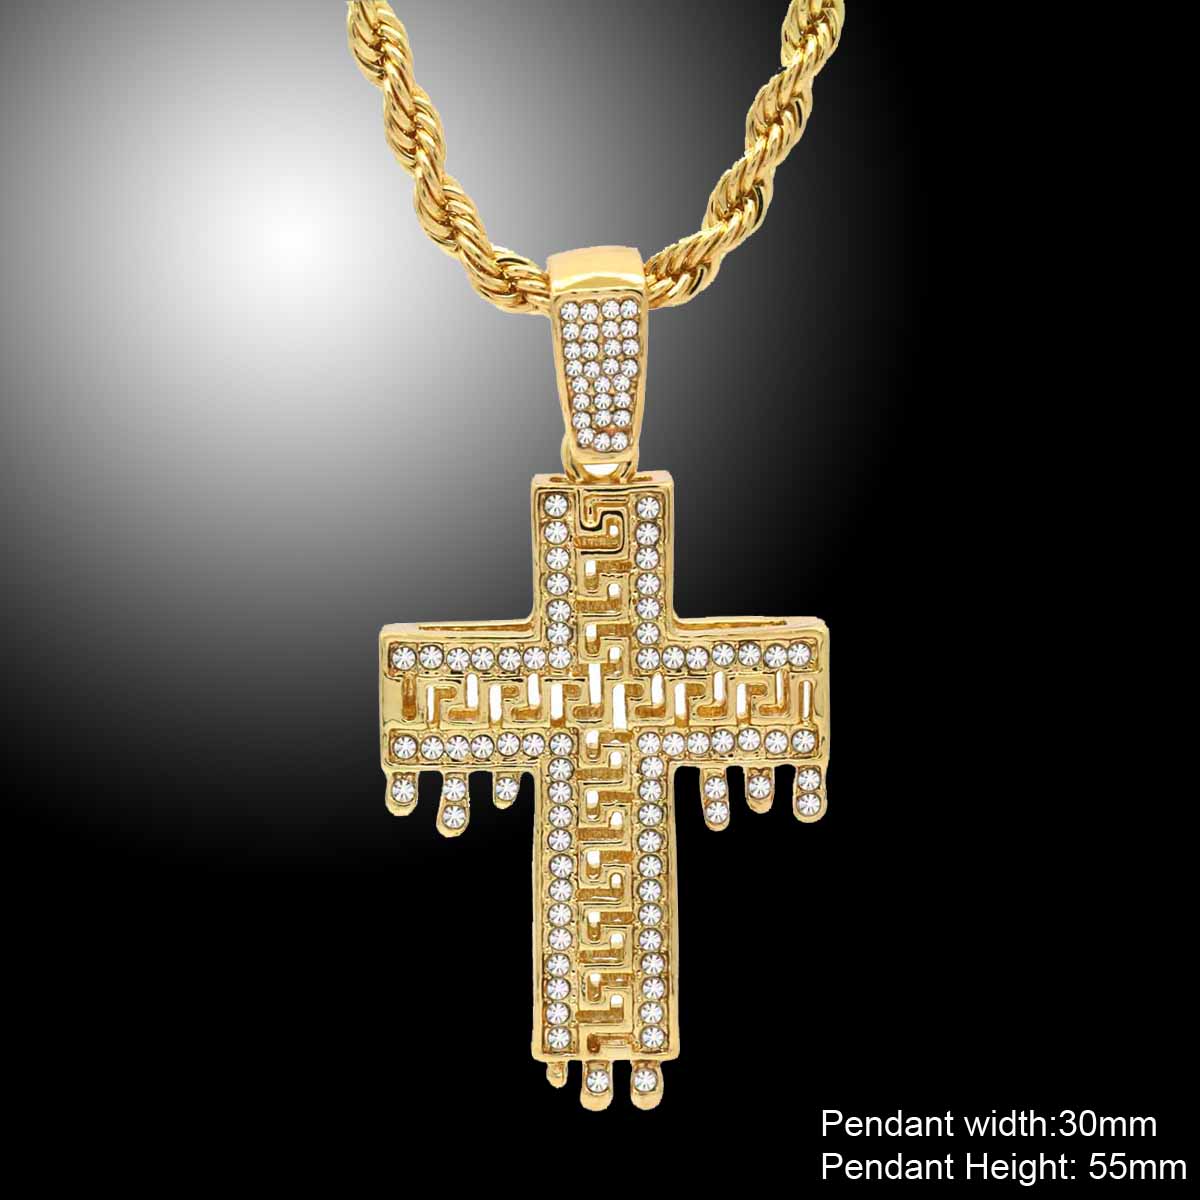 DRIP DESIGN CROSS PENDANT WITH GOLD ROPE CHAIN